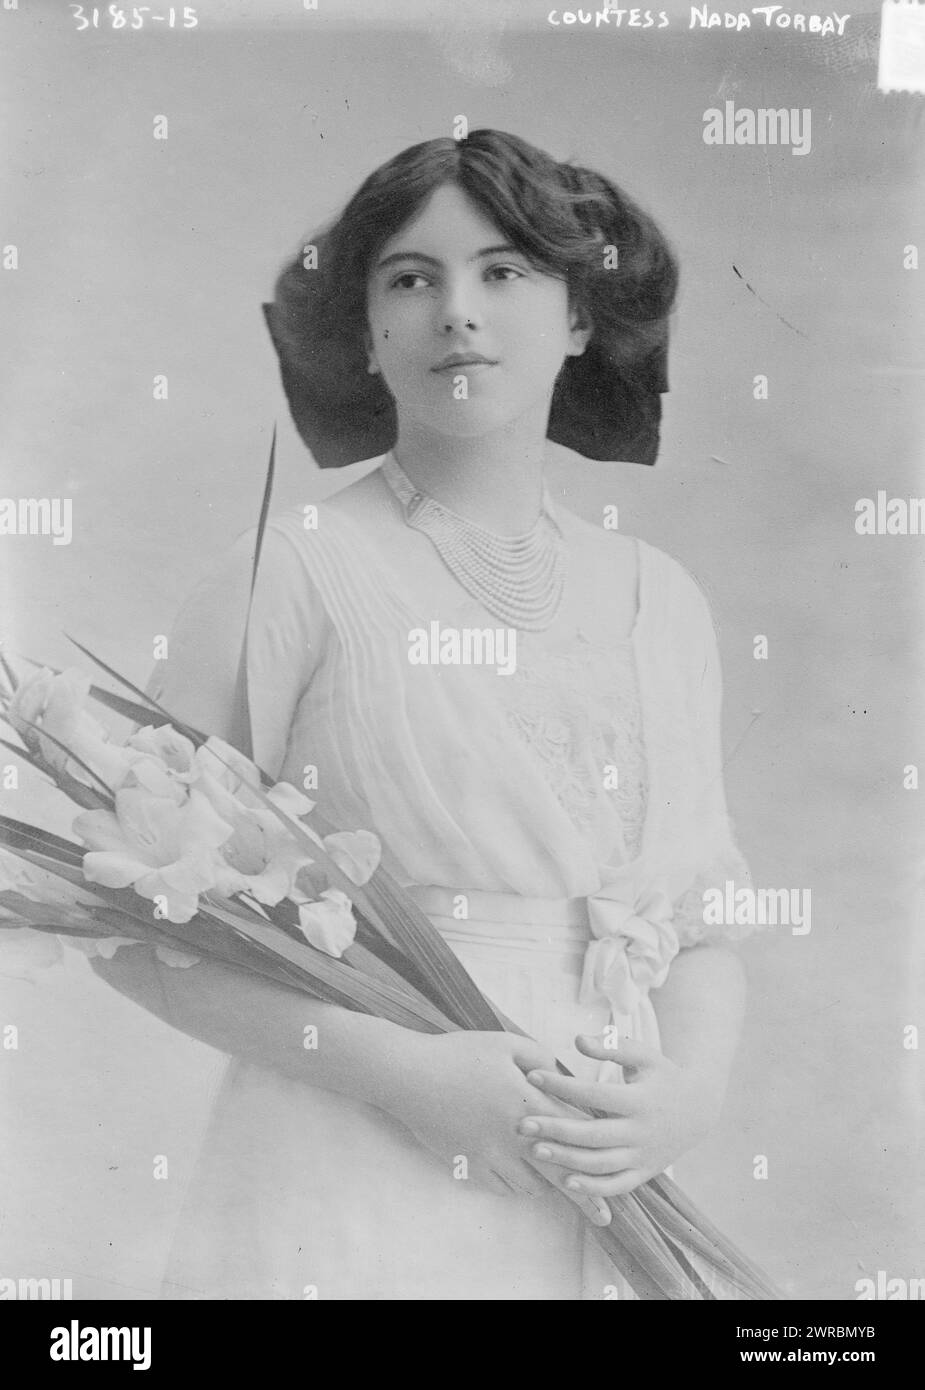 Countess Nada Torbay, Photograph shows Nadejda Mikhailovna Mountbatten (1896-1963) (Nadejda de Torby), who was the daughter of Grand Duke Michael Mikhailovich of Russia and his wife Sophie, Countess von Merenberg (Countess de Torby)., between ca. 1910 and ca. 1915, Glass negatives, 1 negative: glass Stock Photo